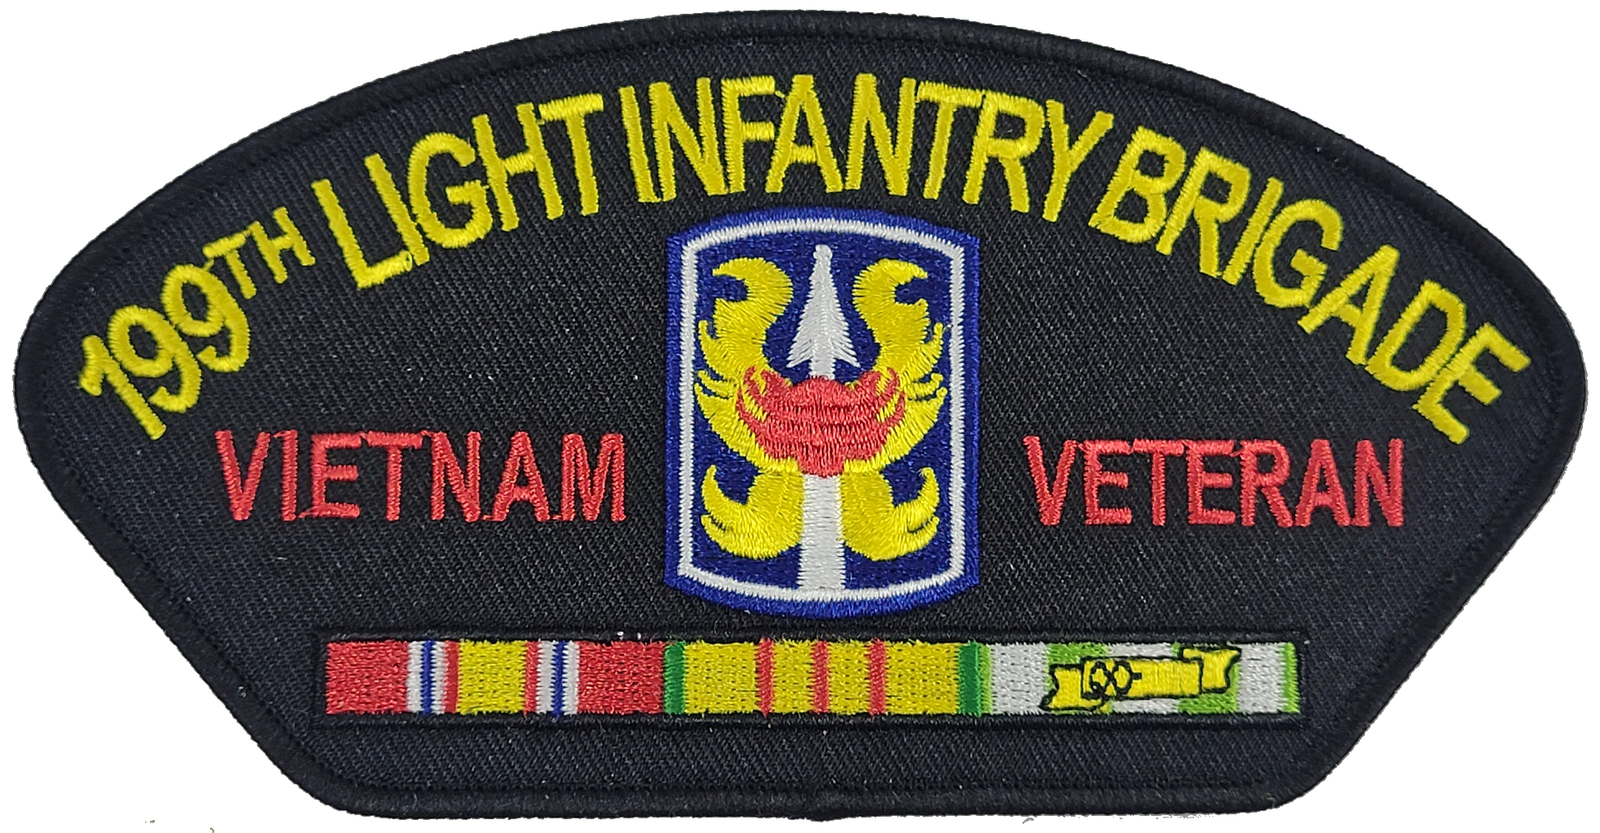 ARMY 199TH INFANTRY BRIGADE VIETNAM VETERAN  6" EMBROIDERED MILITARY PATCH - $29.99